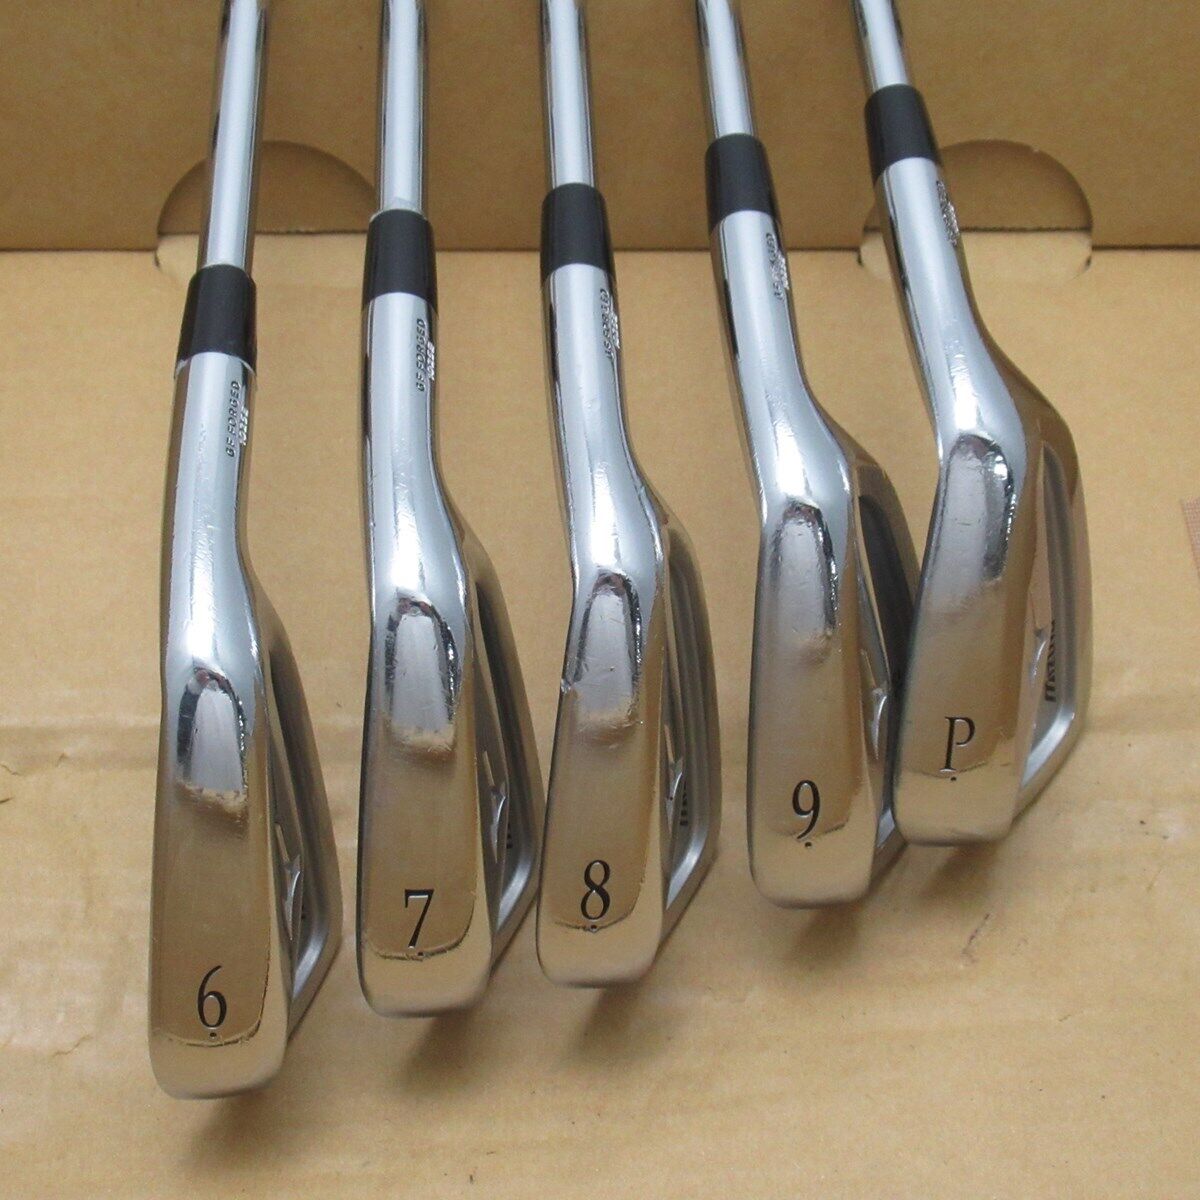 Mizuno MP-55 Iron set 5pcs 5-PW Shaft NSPRO950GH Flex:R Right-handed from Japan